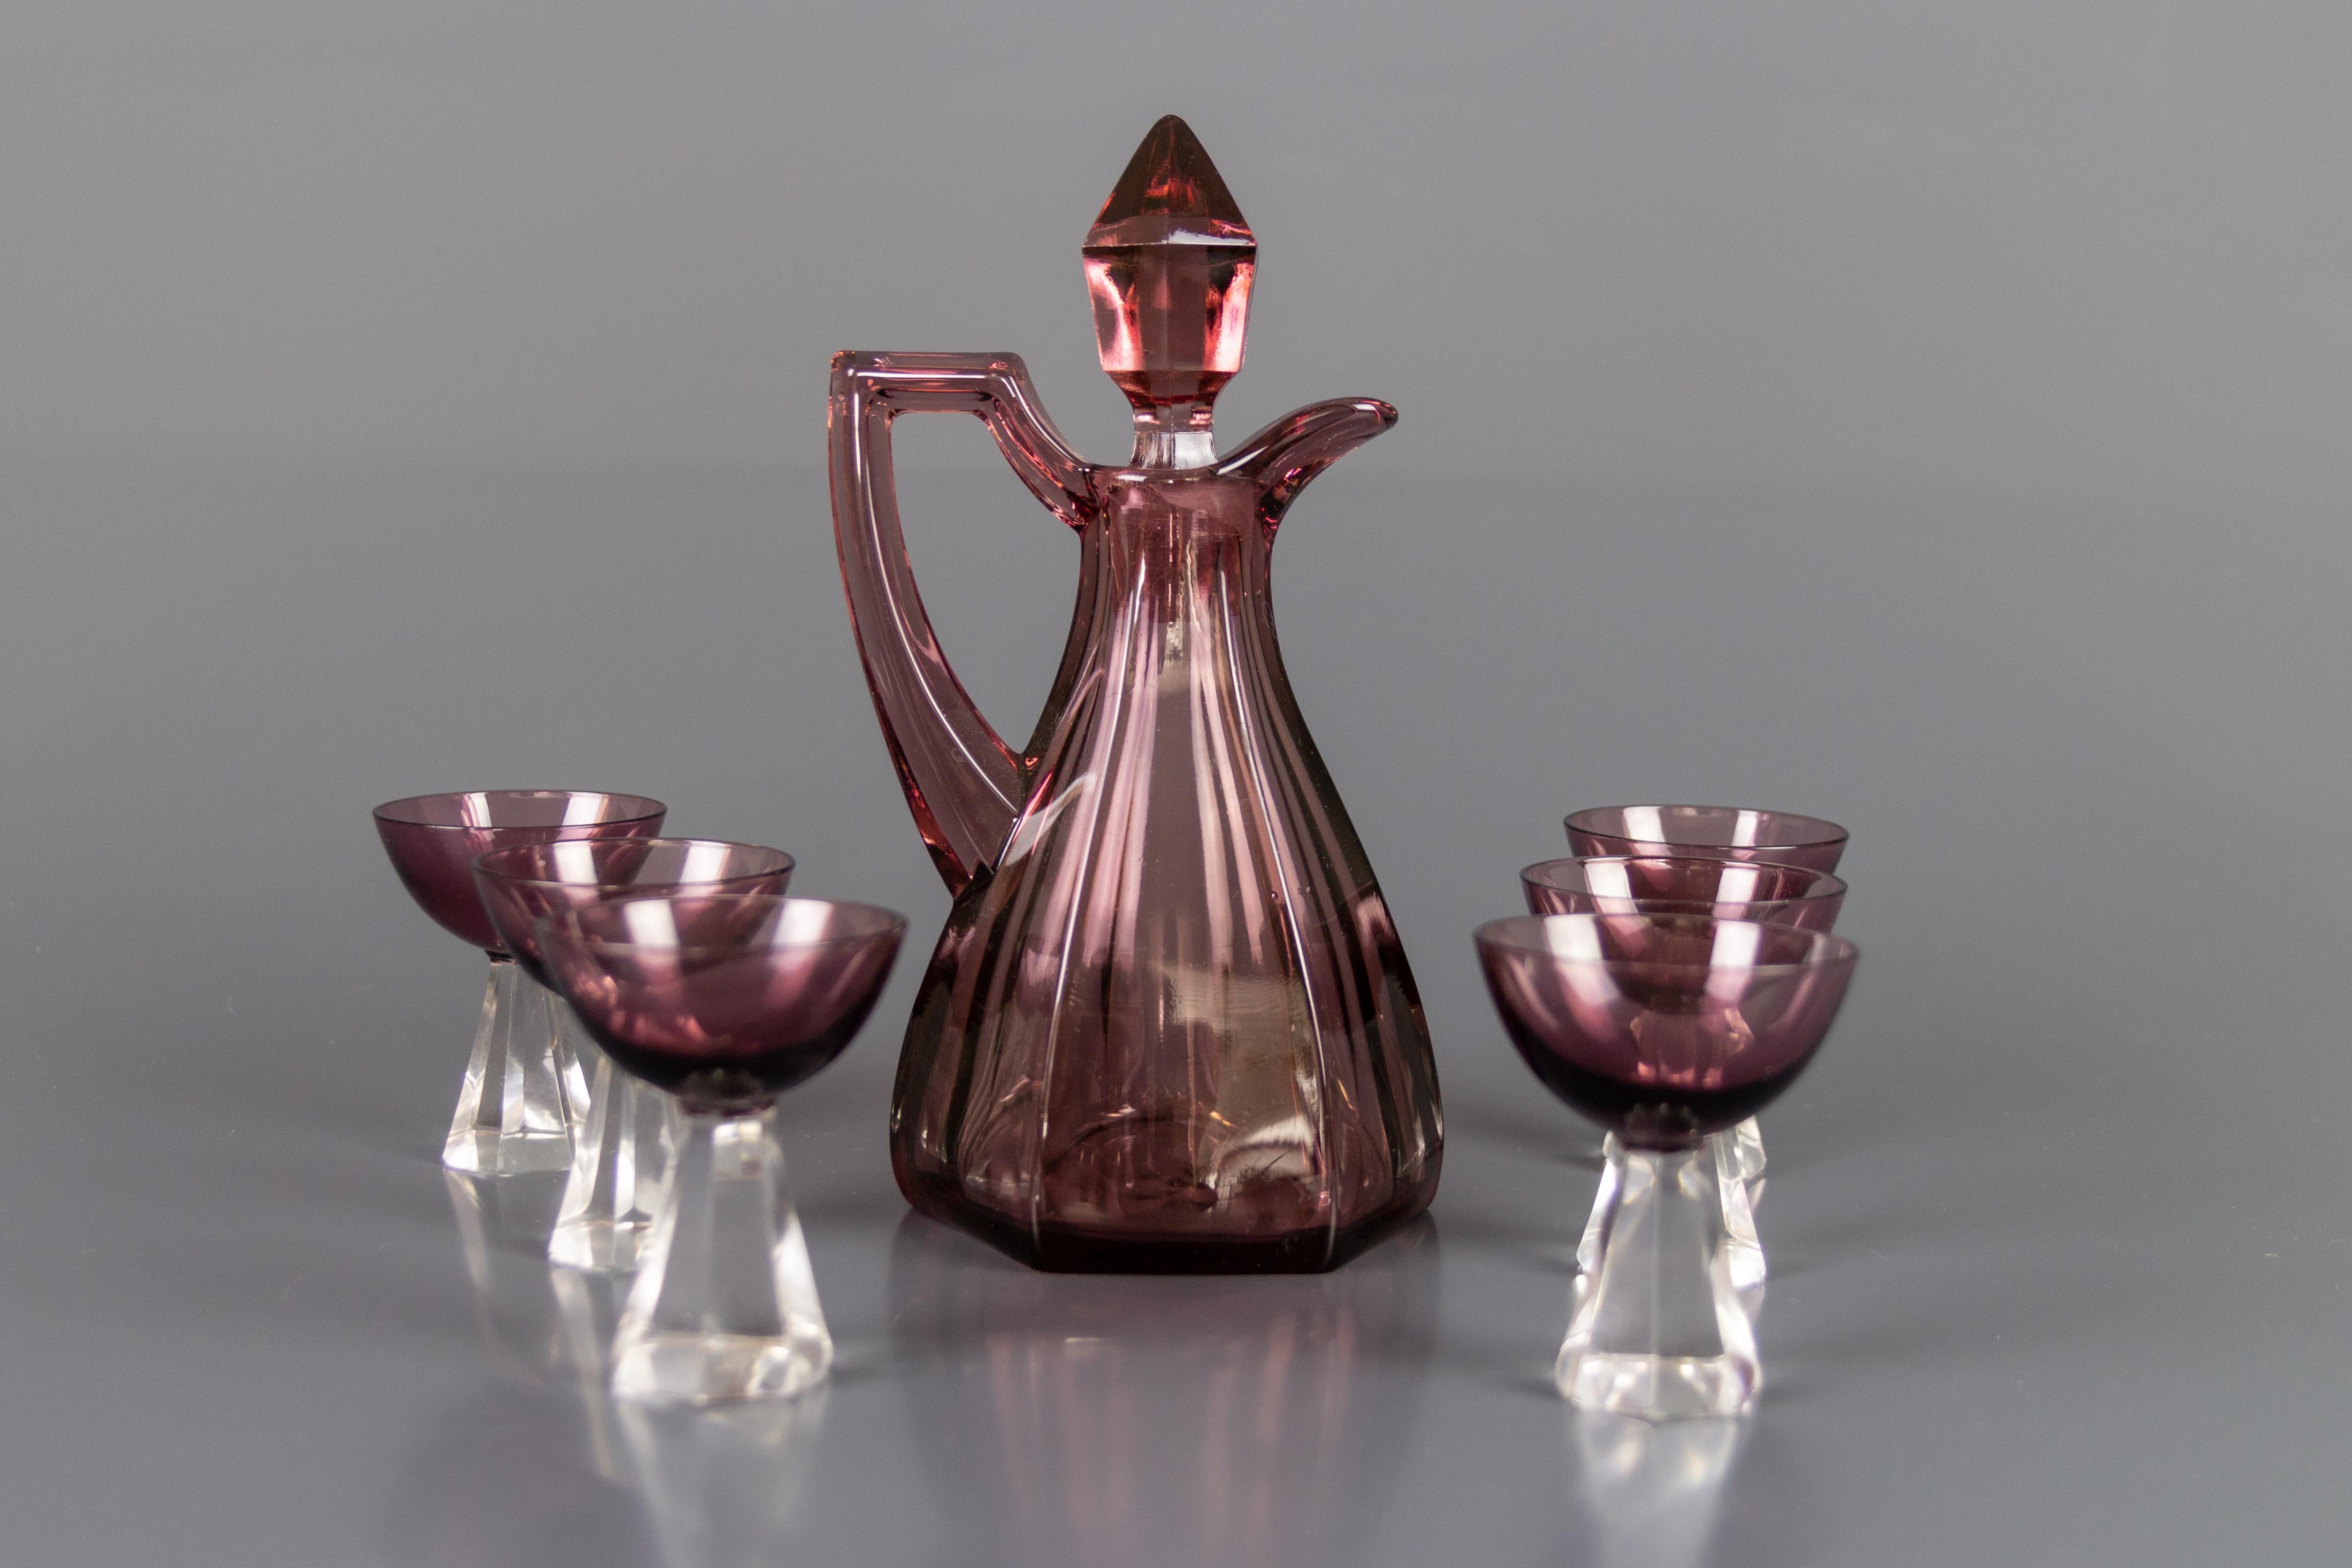 Beautifully shaped mulberry color glass decanter set with 6 glasses, made in the 1950s. The glasses have a transparent base.
Dimensions:
Decanter (including stopper): Height 20 cm / 7.87 in, width 10 cm / 3.93 in, depth 9.5 cm / 3.74 in. Stopper: